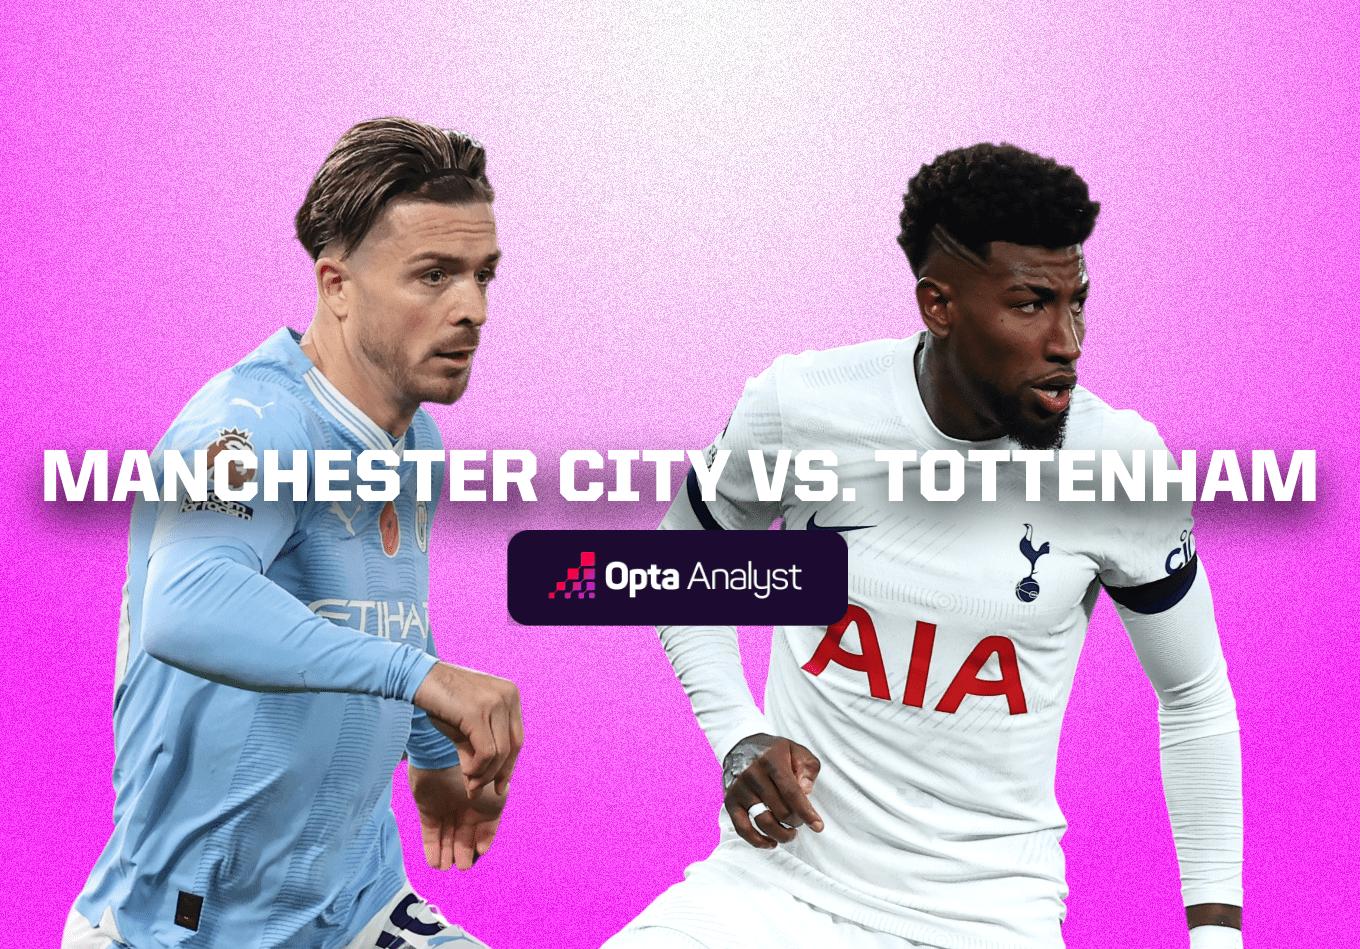 Manchester City vs Tottenham: Prediction and Preview